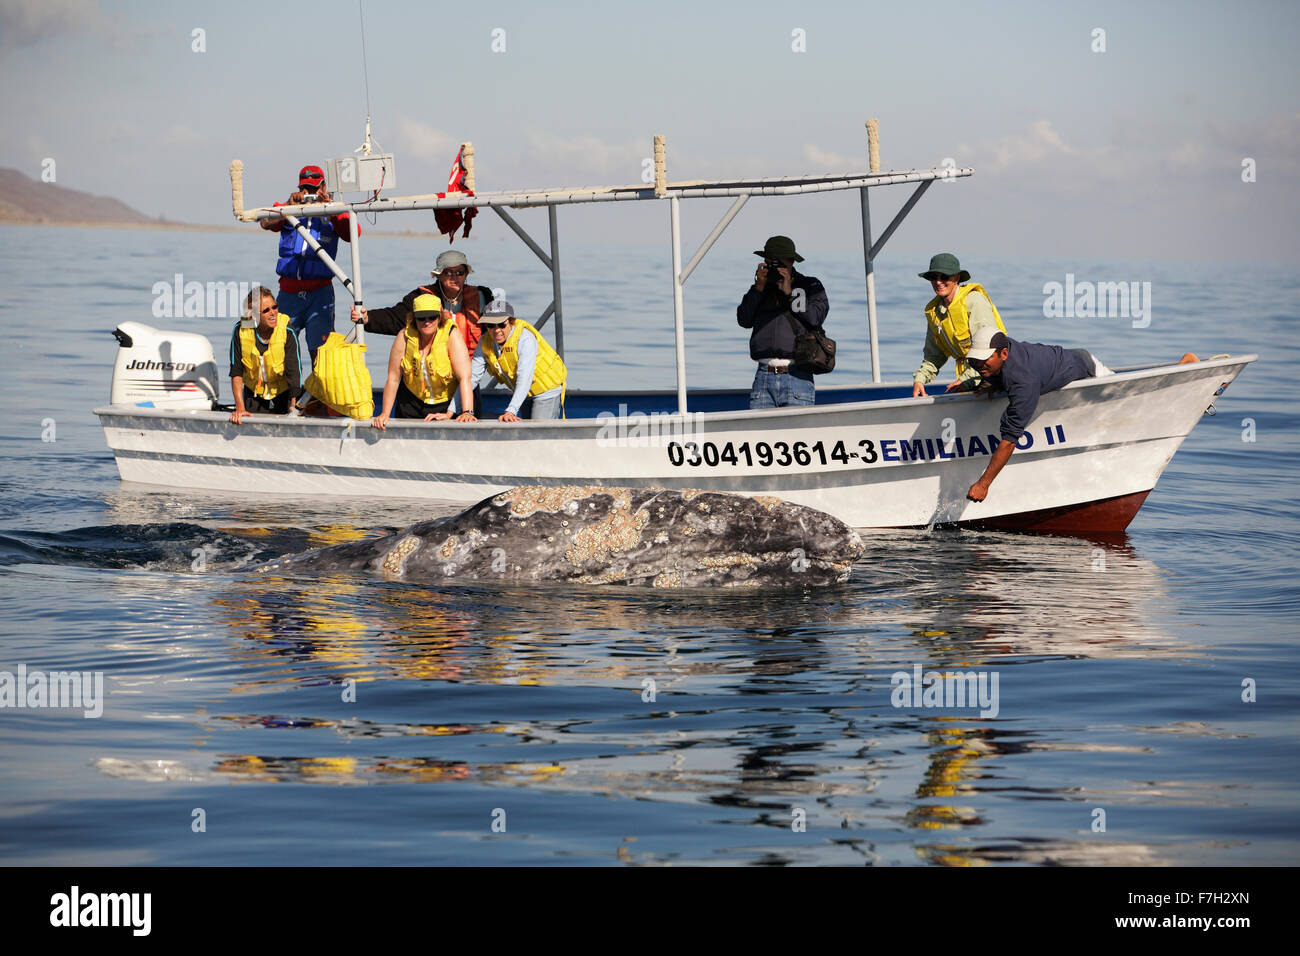 pr5004-D. Gray Whale (Eschrichtius robustus) surfacing next to whale-watching boat with tourists. Magdalena Bay, Baja, Mexico. Stock Photo